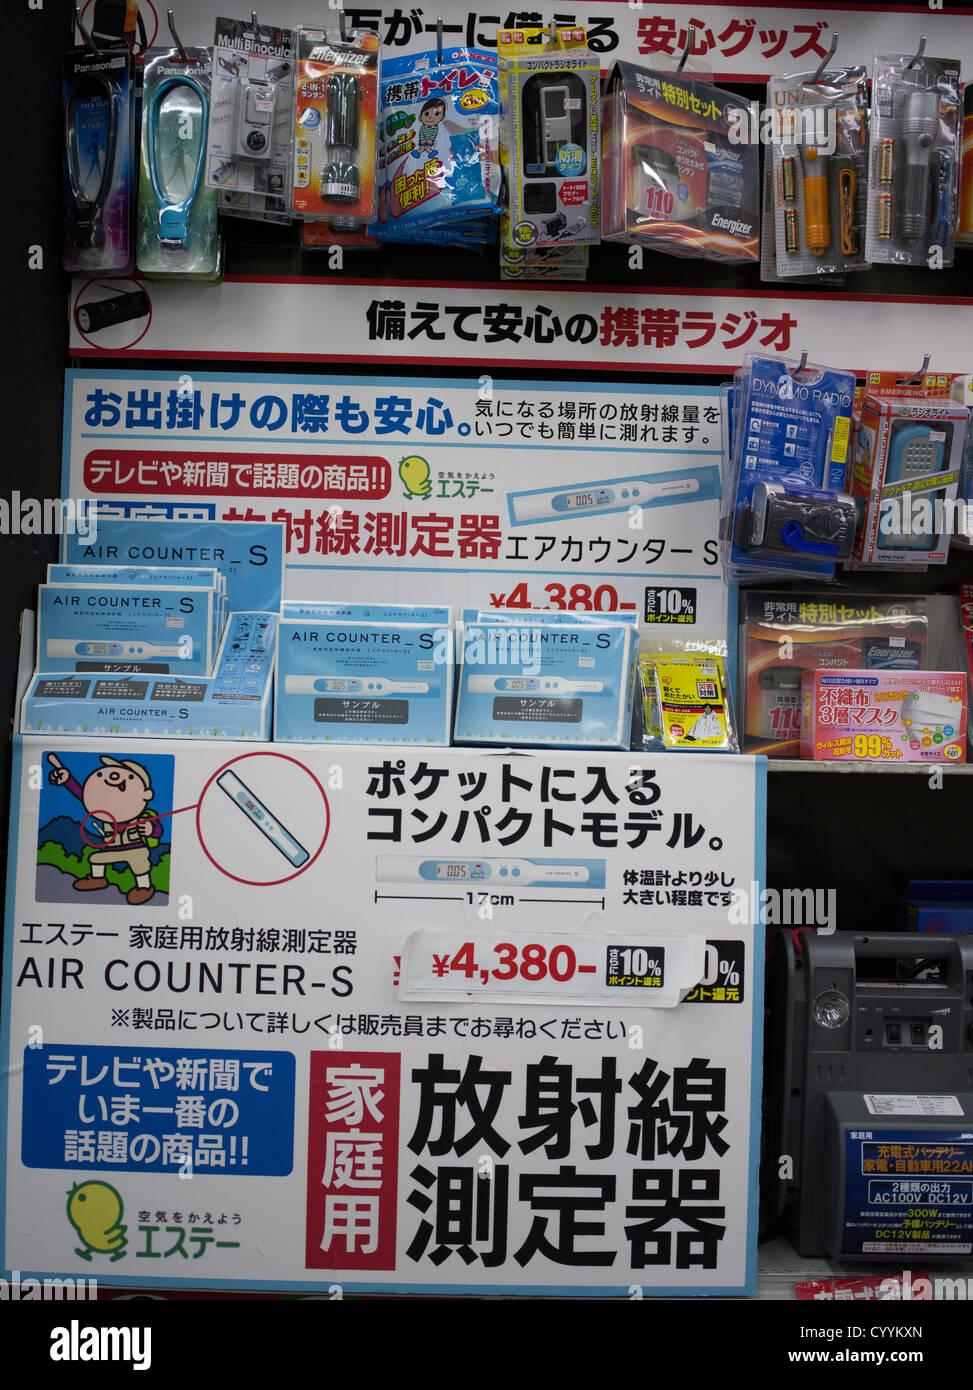 Earthquake, tsunami, and radiation emergency and detection equipment inc. dosimeters on sale in Tokyo, for home disaster kits. Stock Photo